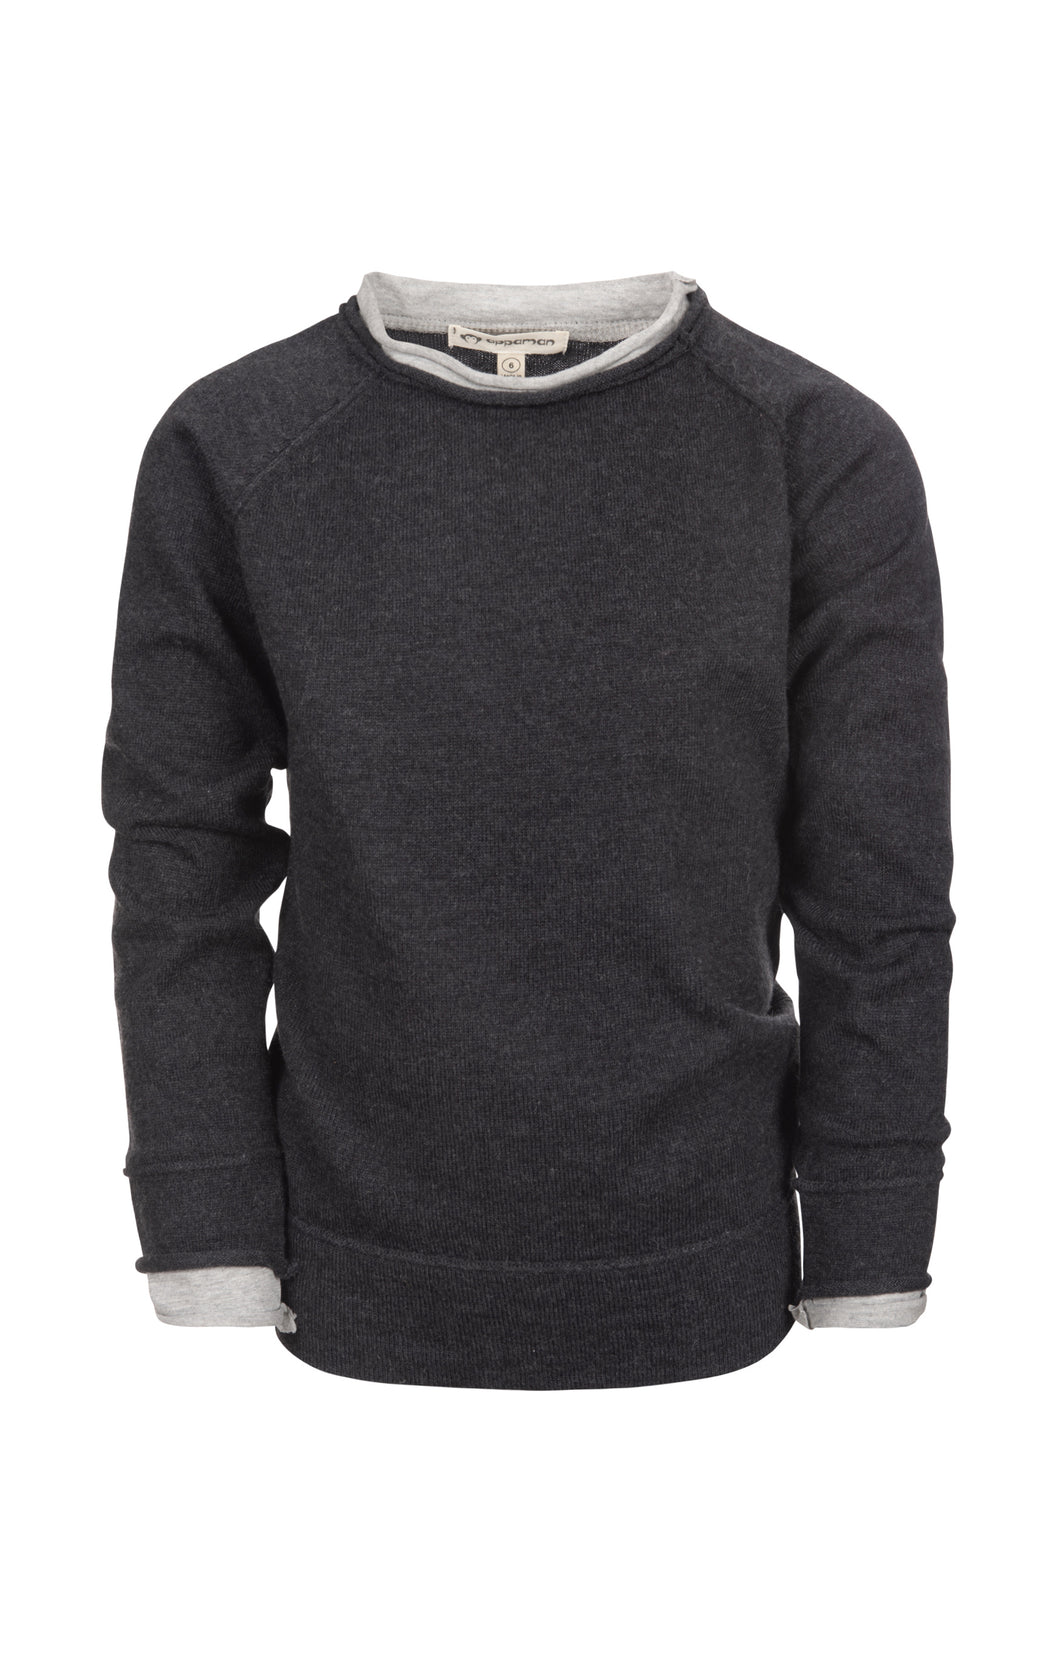 Jackson Roll Neck Sweater - Charcoal Heather